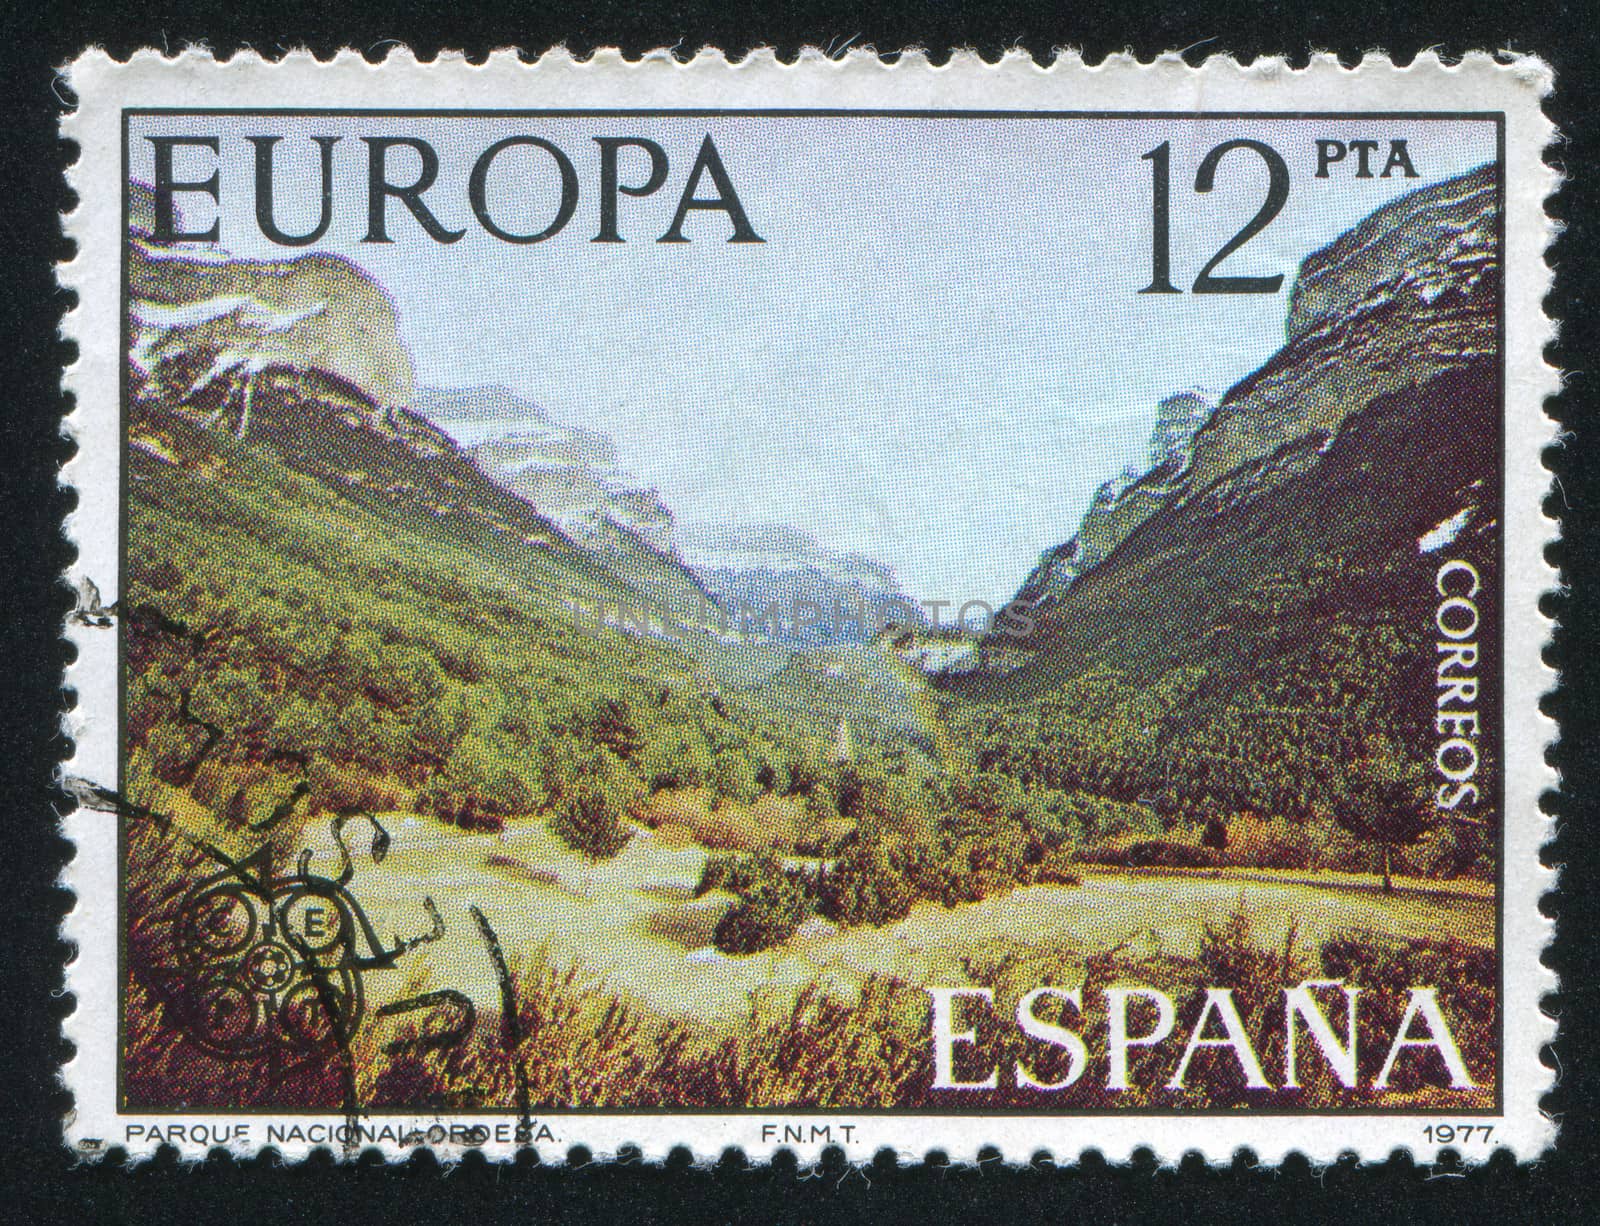 Ordesa National Park by rook